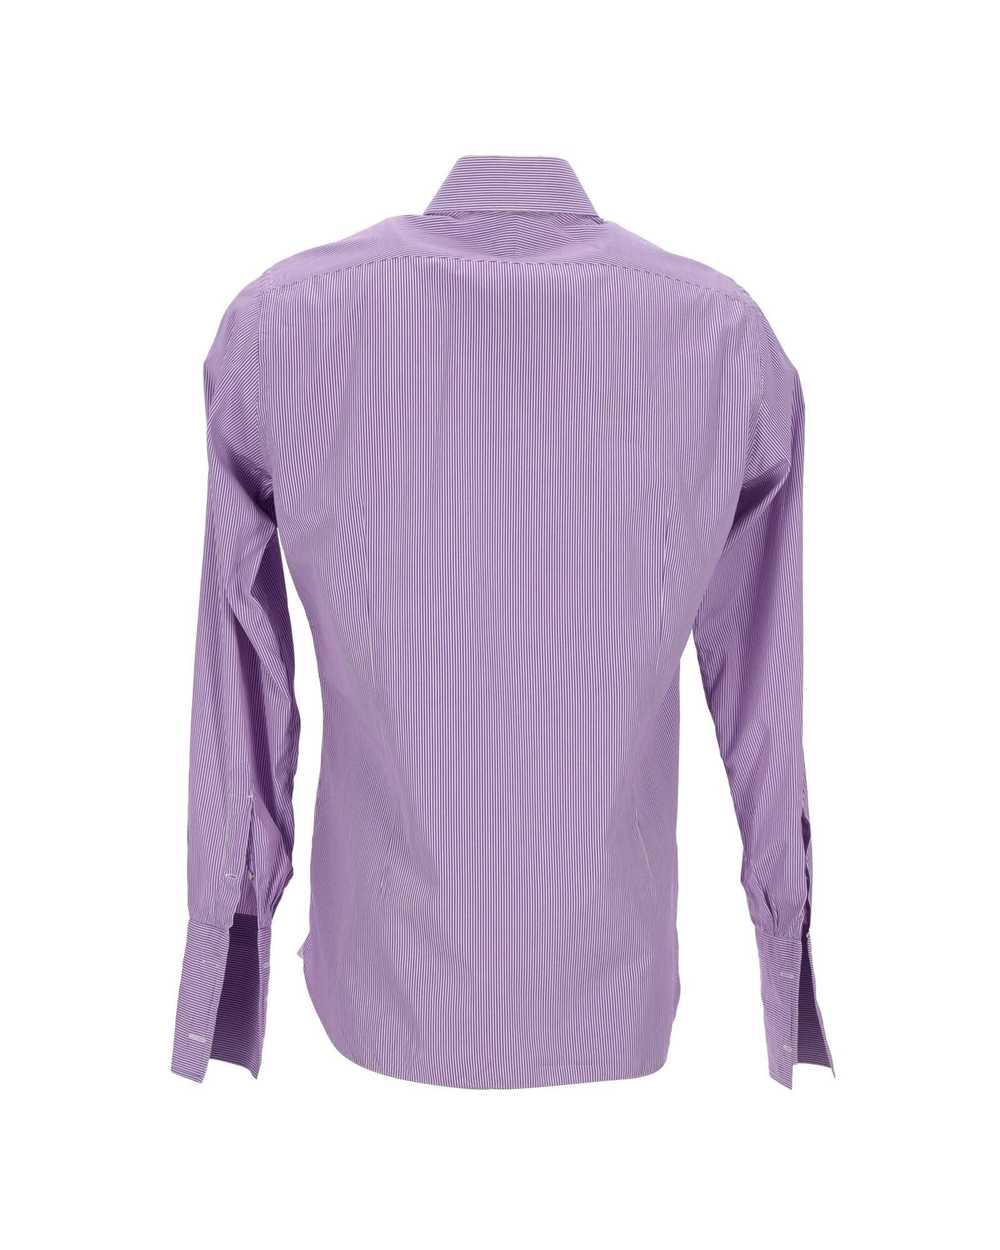 Tom Ford Striped Cotton Shirt in Bold Purple - image 3